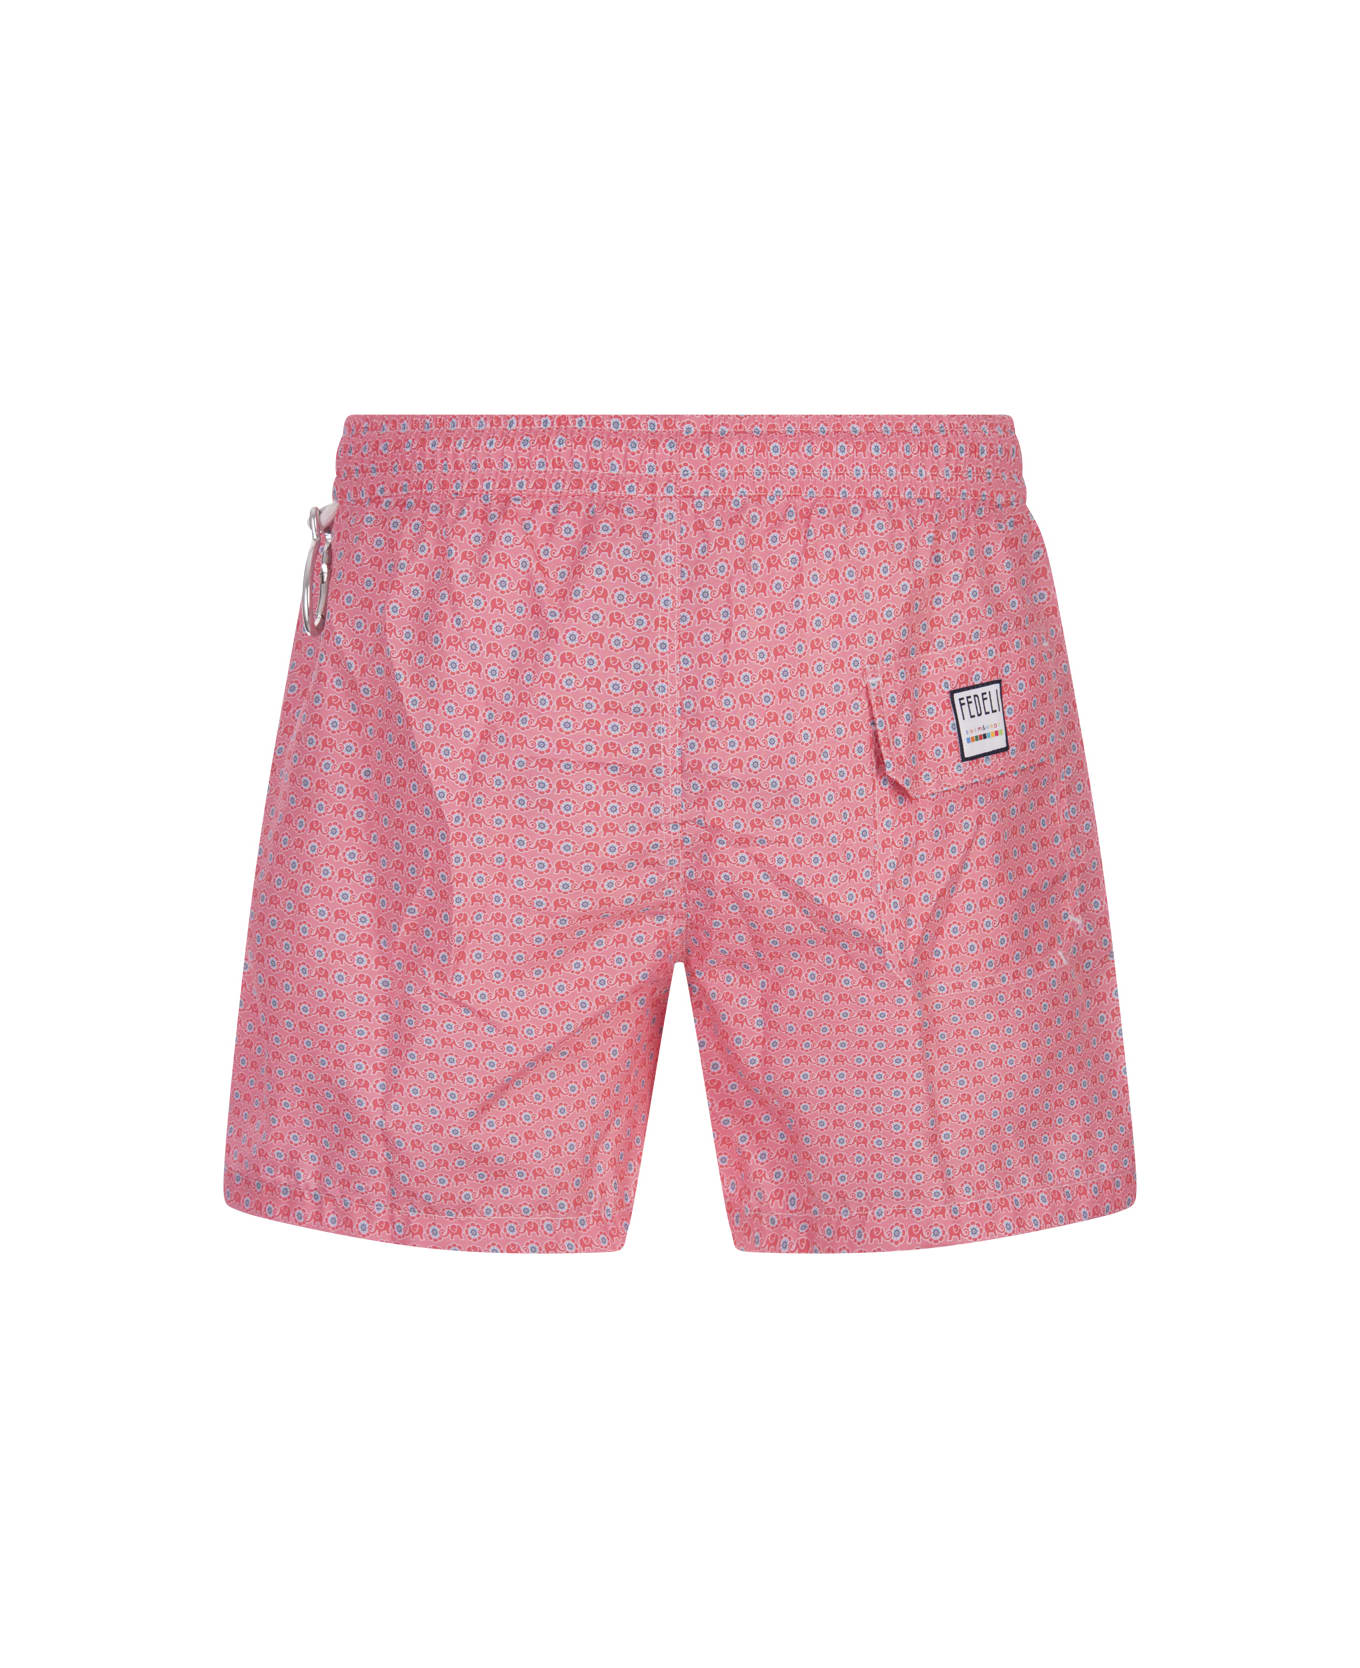 Fedeli Pink Swim Shorts With Elephants And Flowers Pattern - Pink スイムトランクス